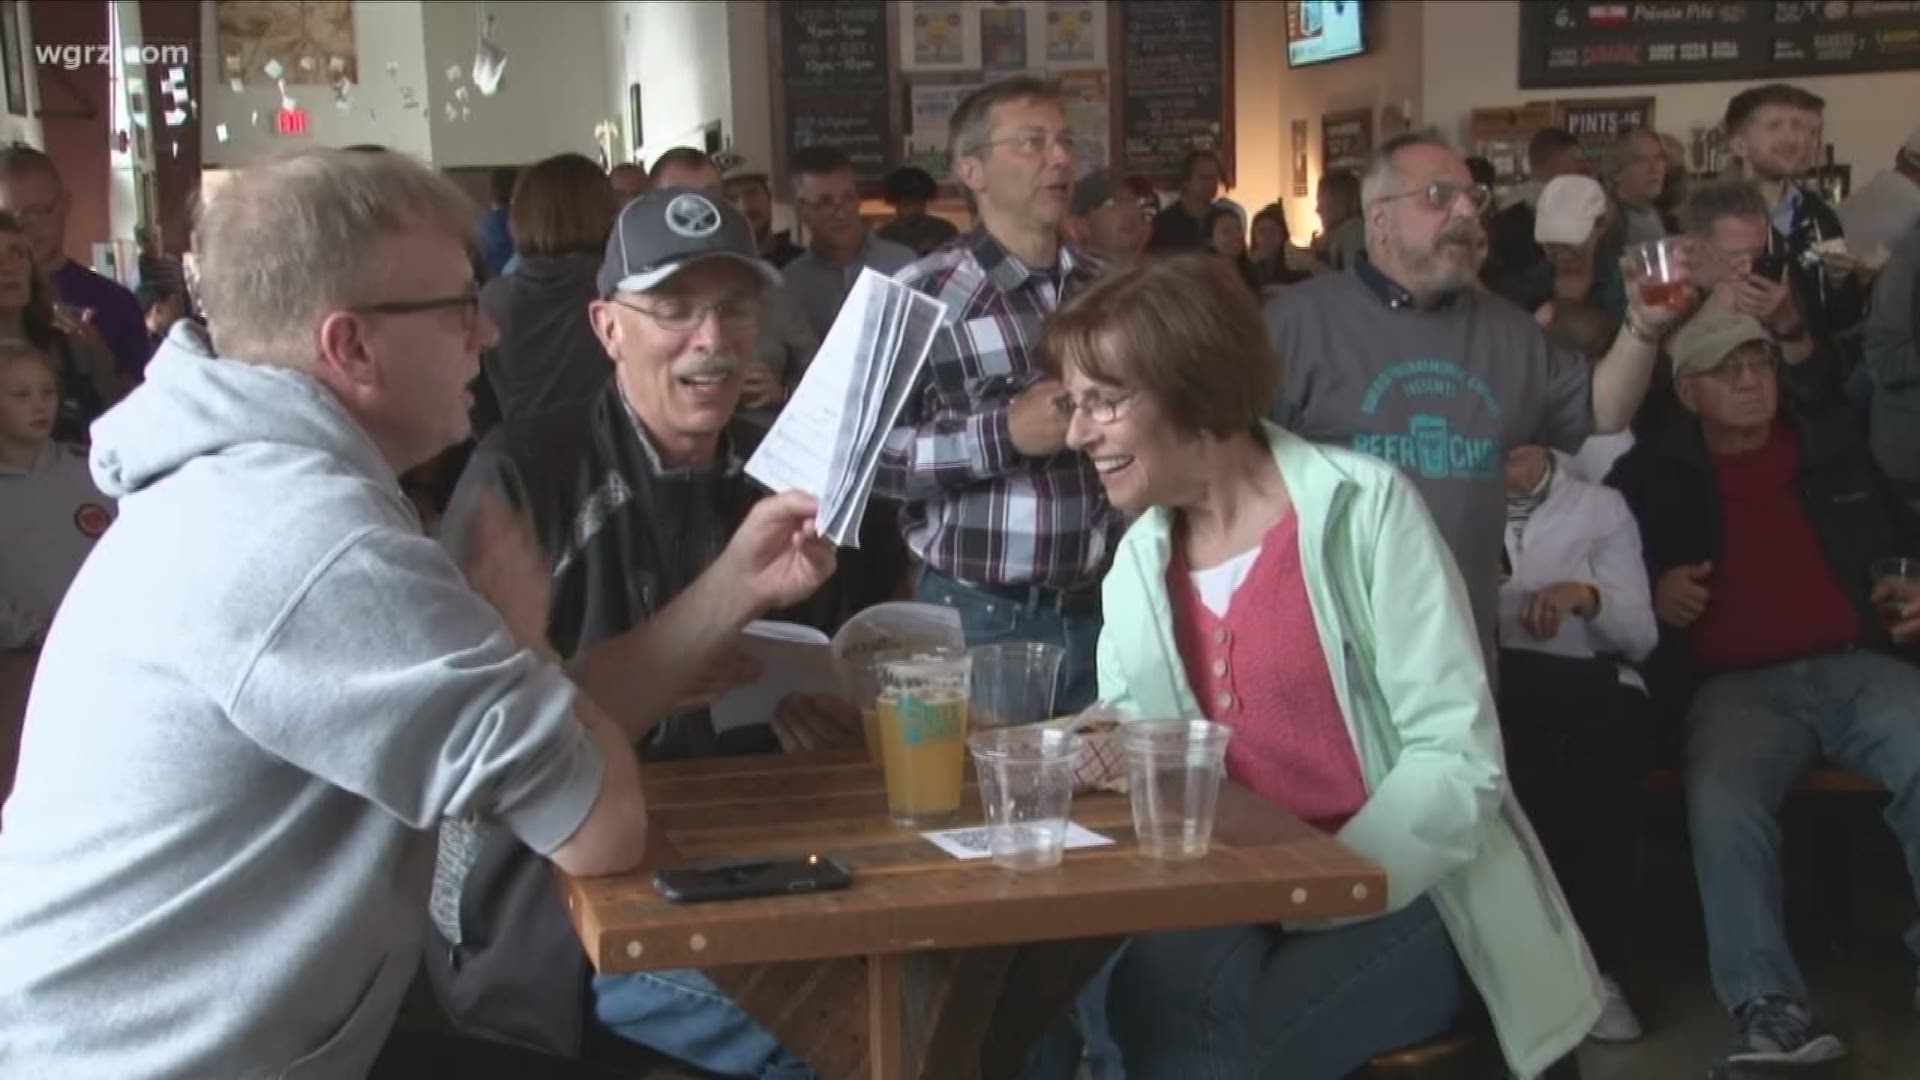 People were raising a glass while raising their voices in song at flying bison brewing tonight.